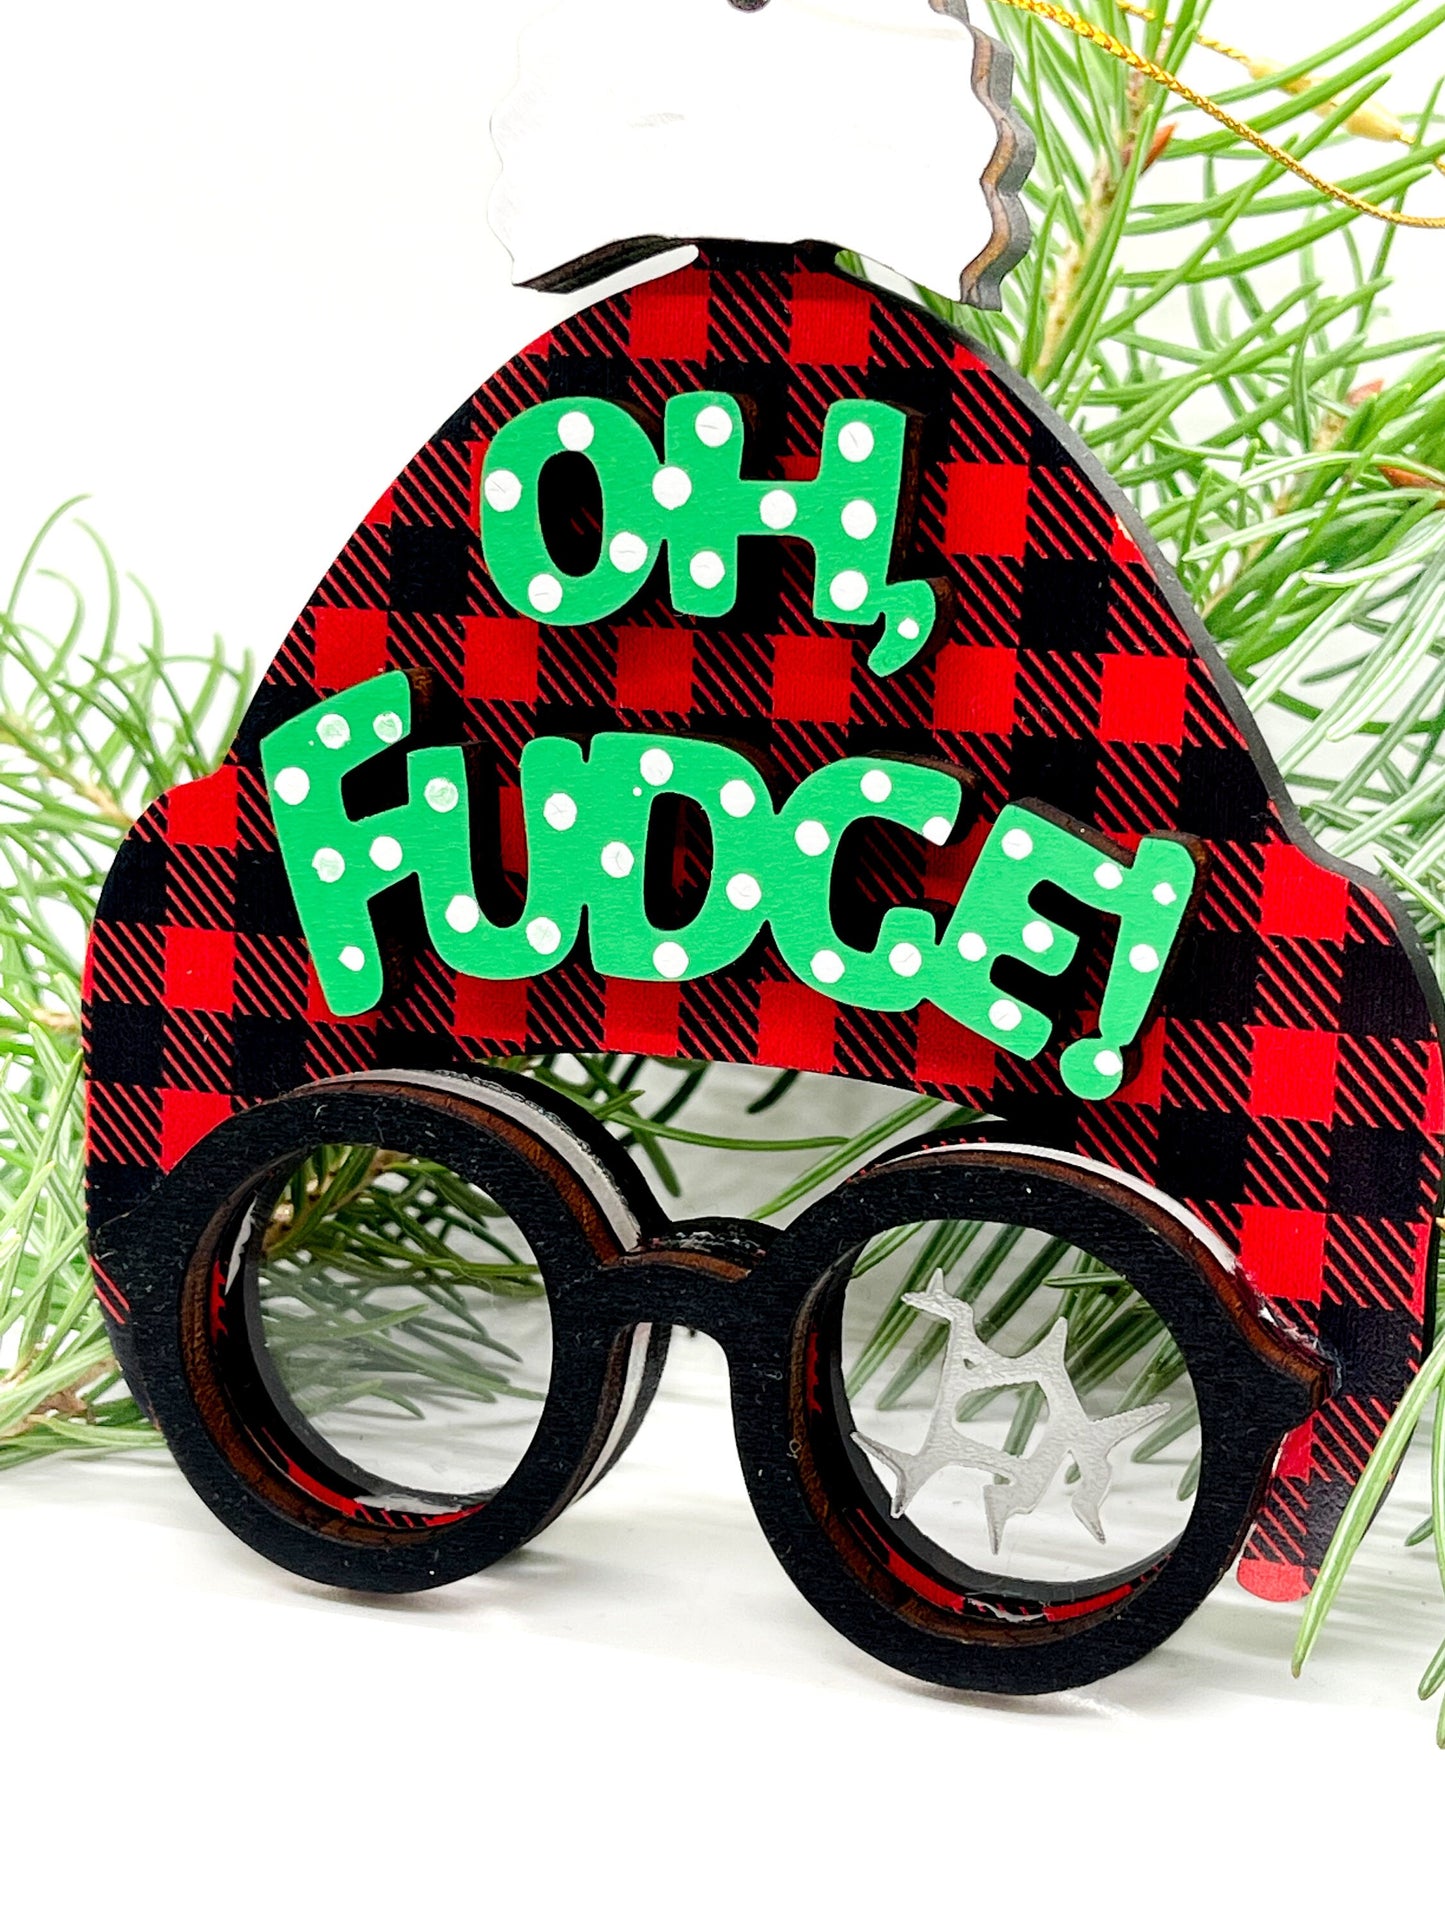 OH FUDGE Christmas Ornament | Ralphie Ornament | A Christmas Story Ornament | You'll Shoot Your Eye Out!